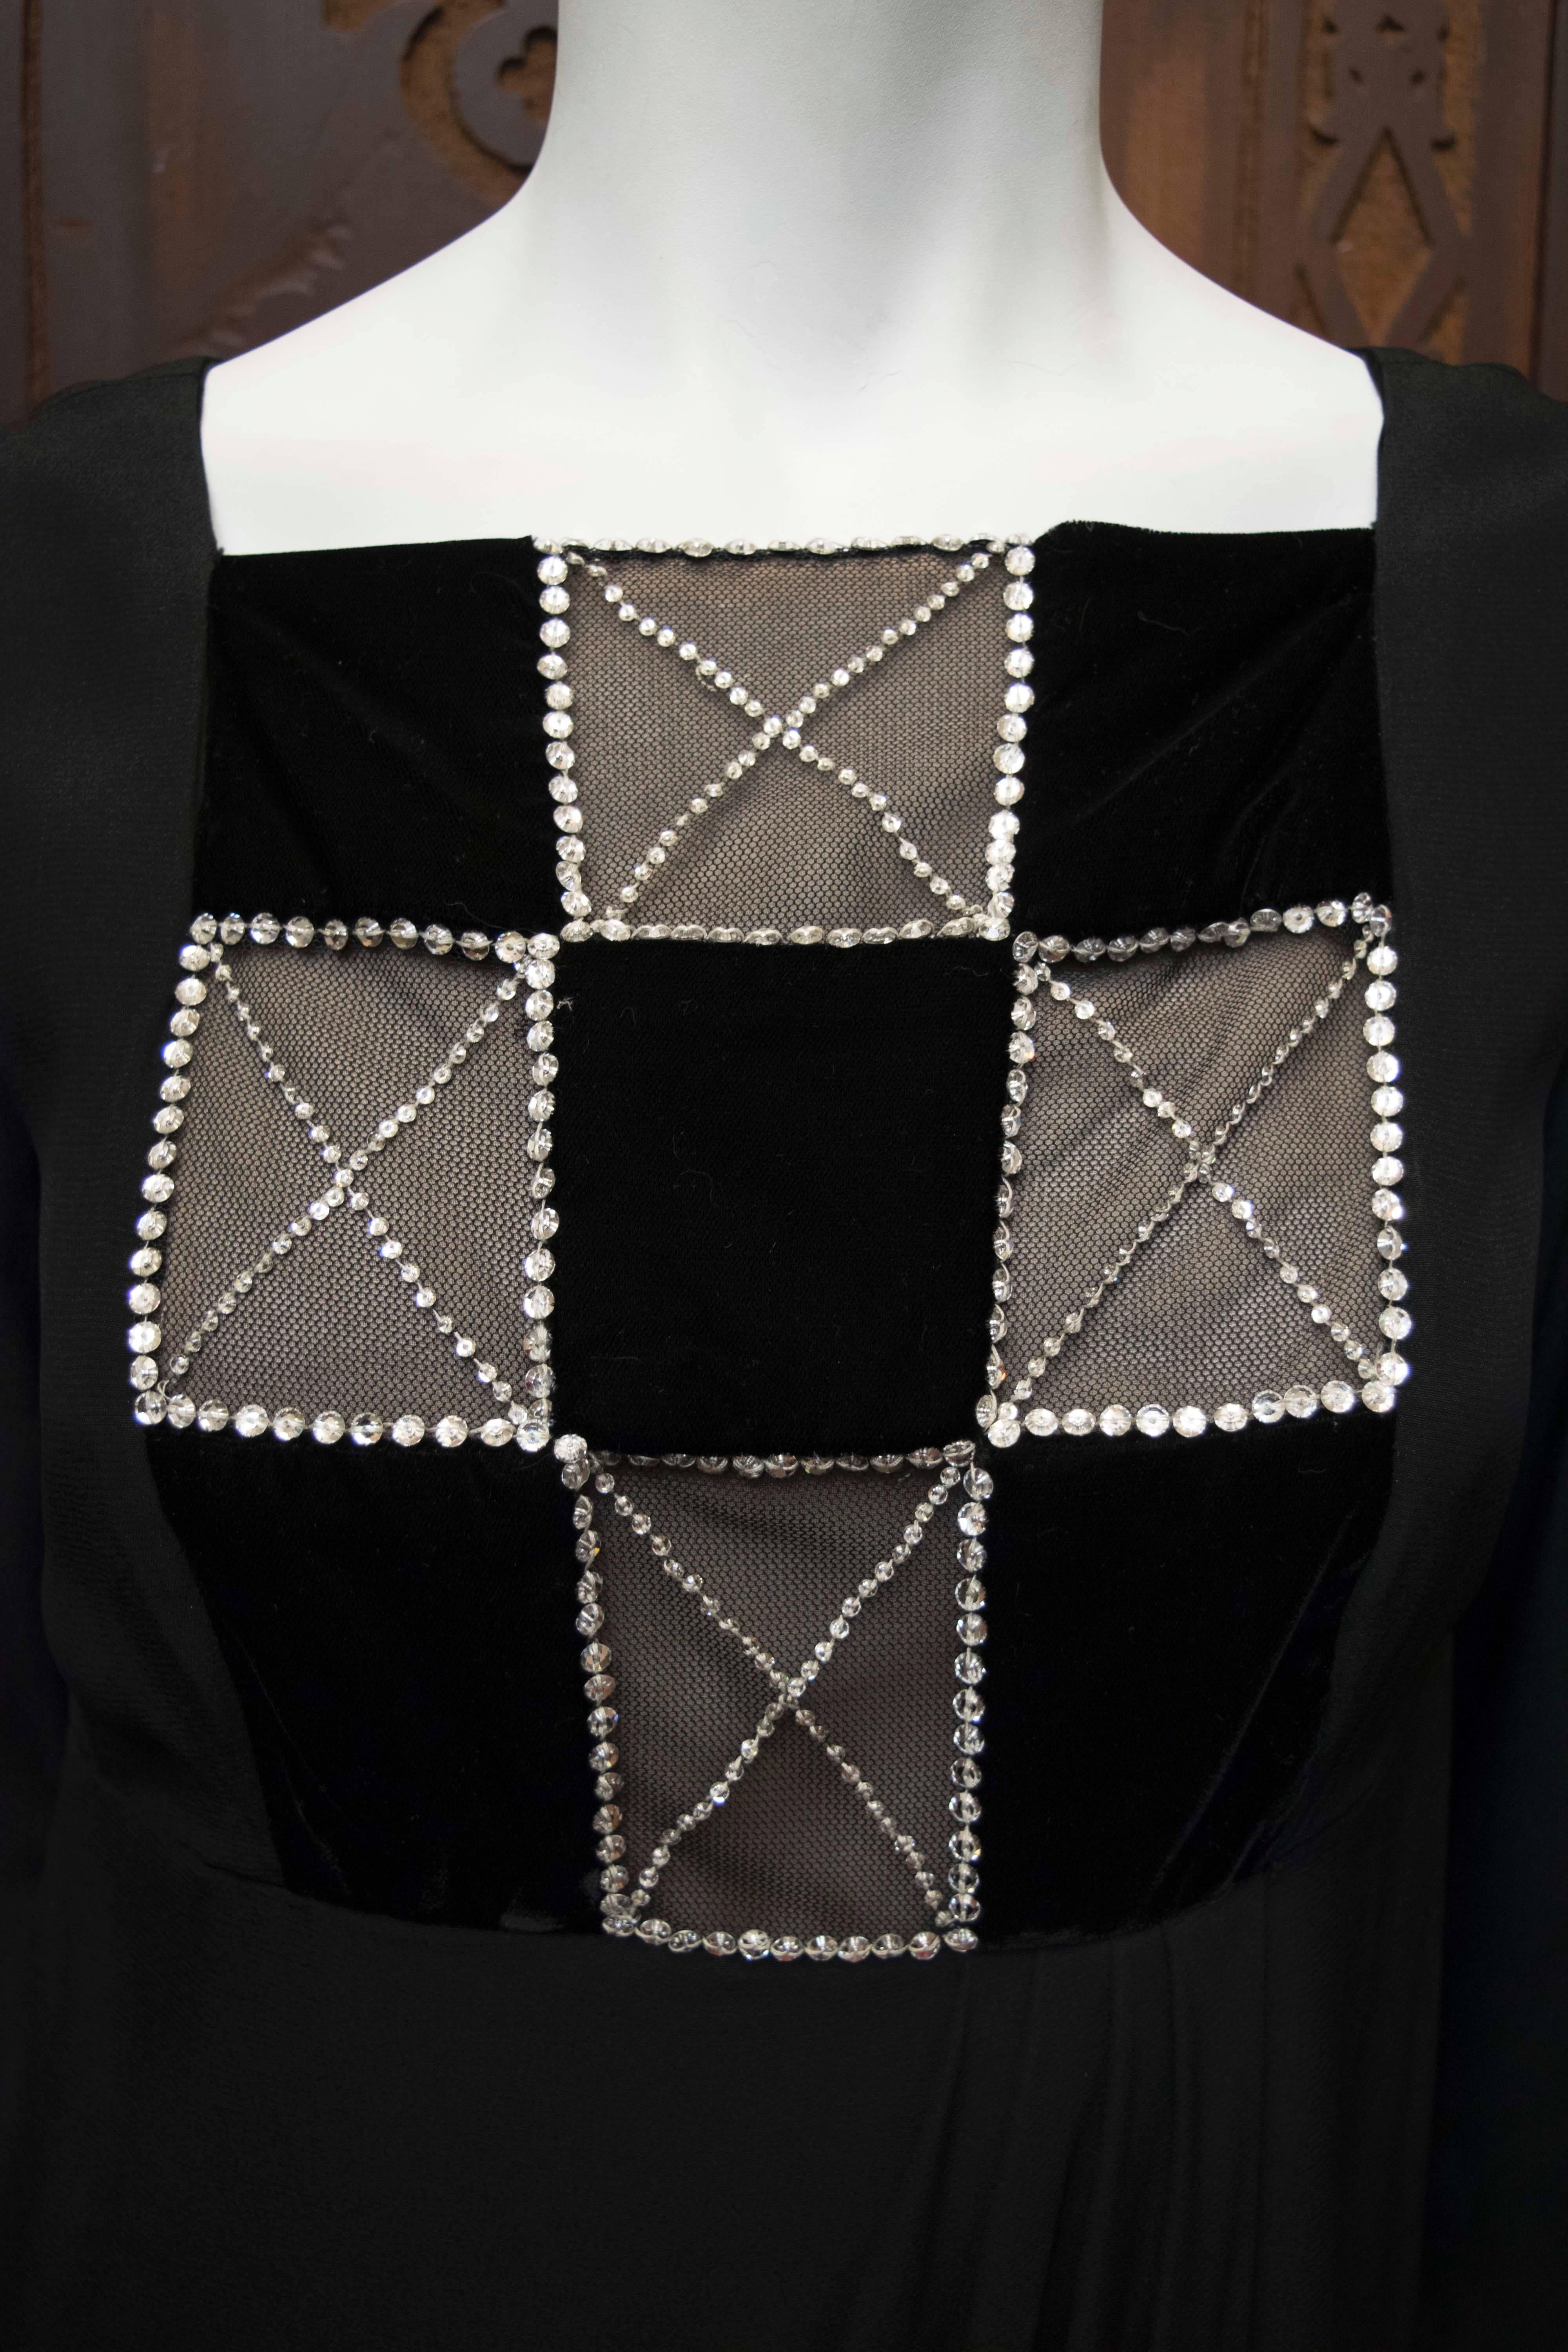 1980s Bob Mackie long sleeve black crepe cocktail dress with rondel crystal trimmed illusion bodice featuring contrasting squares of nude net over lining. Sleeve is gathered at shoulder. Skirt of dress is gathered at the front in a neat grecian